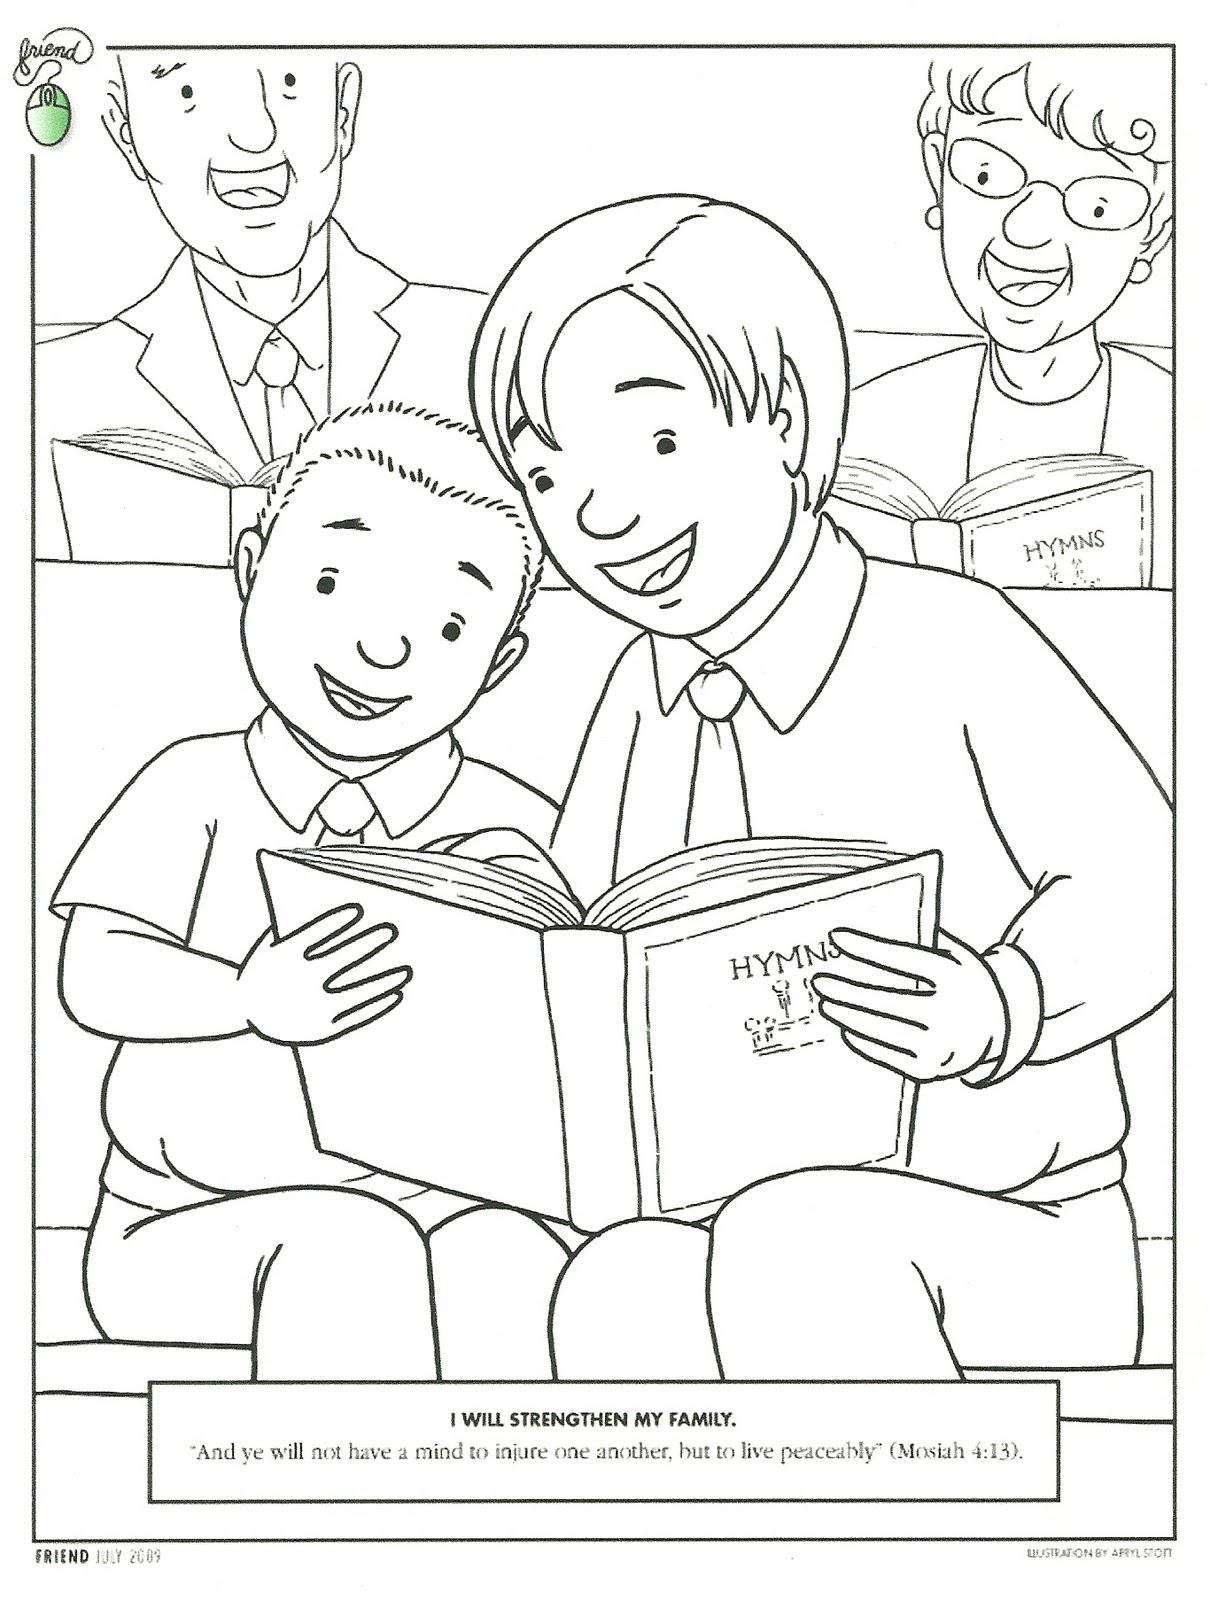 sabbath day coloring pages - photo #9